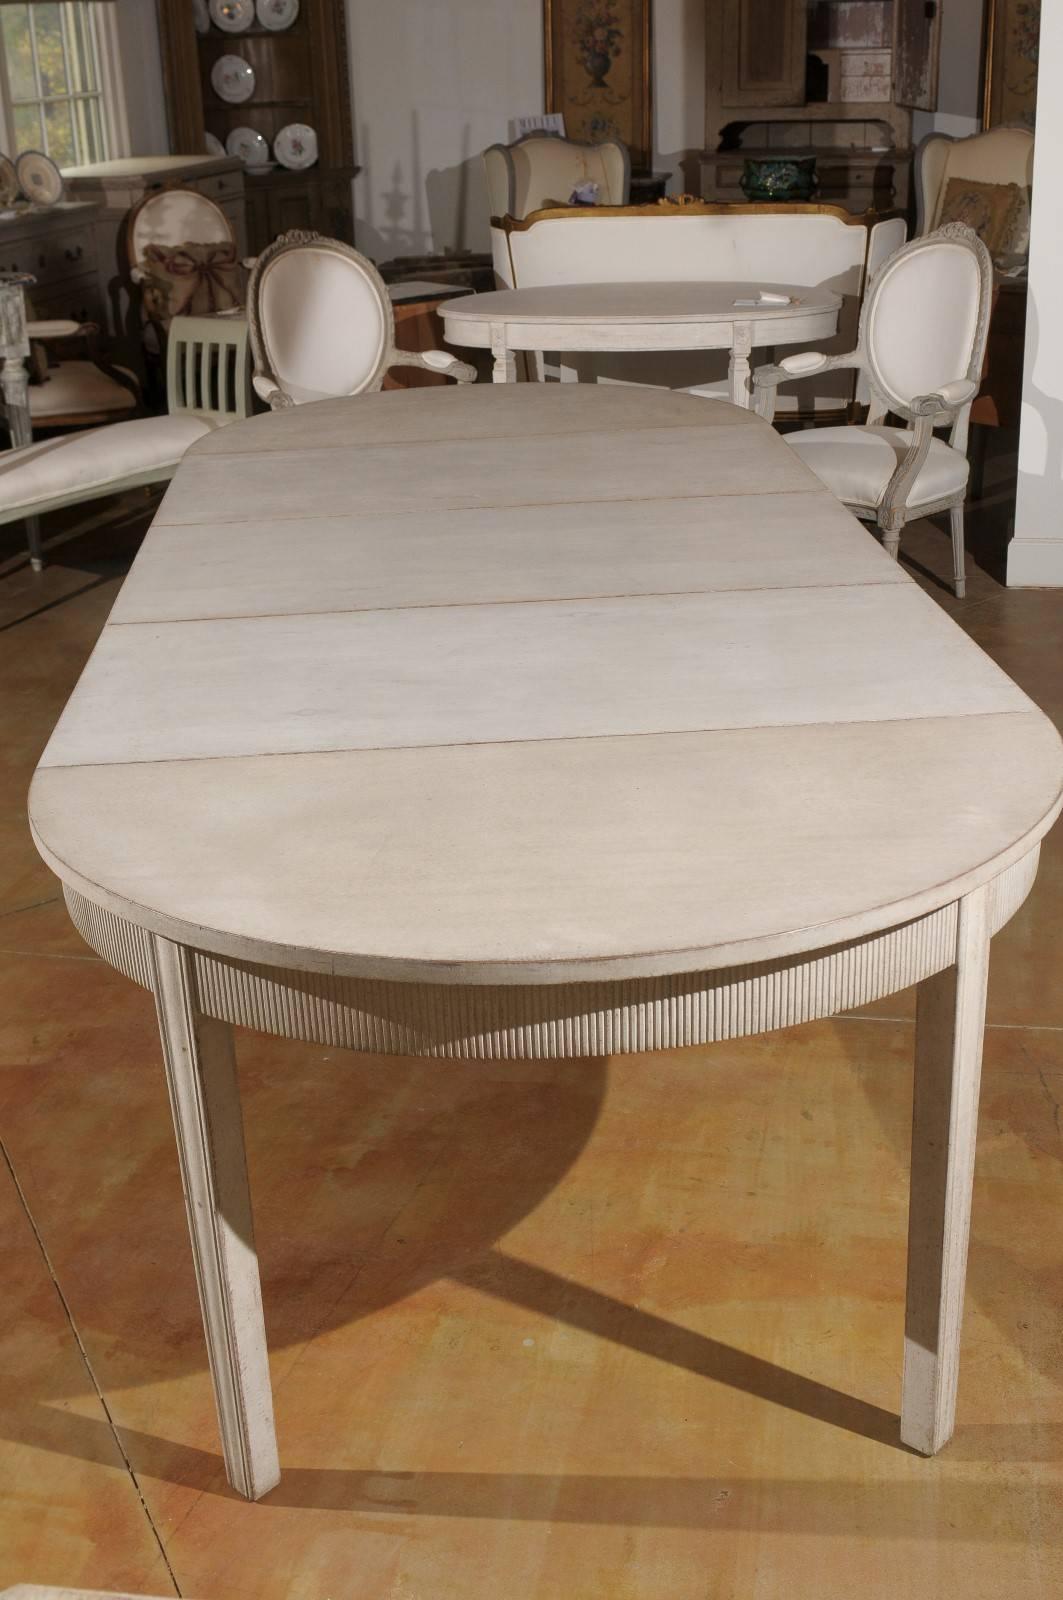 A Swedish Gustavian style painted wood extension dining room table from the late 19th century with carved apron and three leaves. This Swedish dining room table features the clean silhouette typical of the Gustavian style. Without its additional